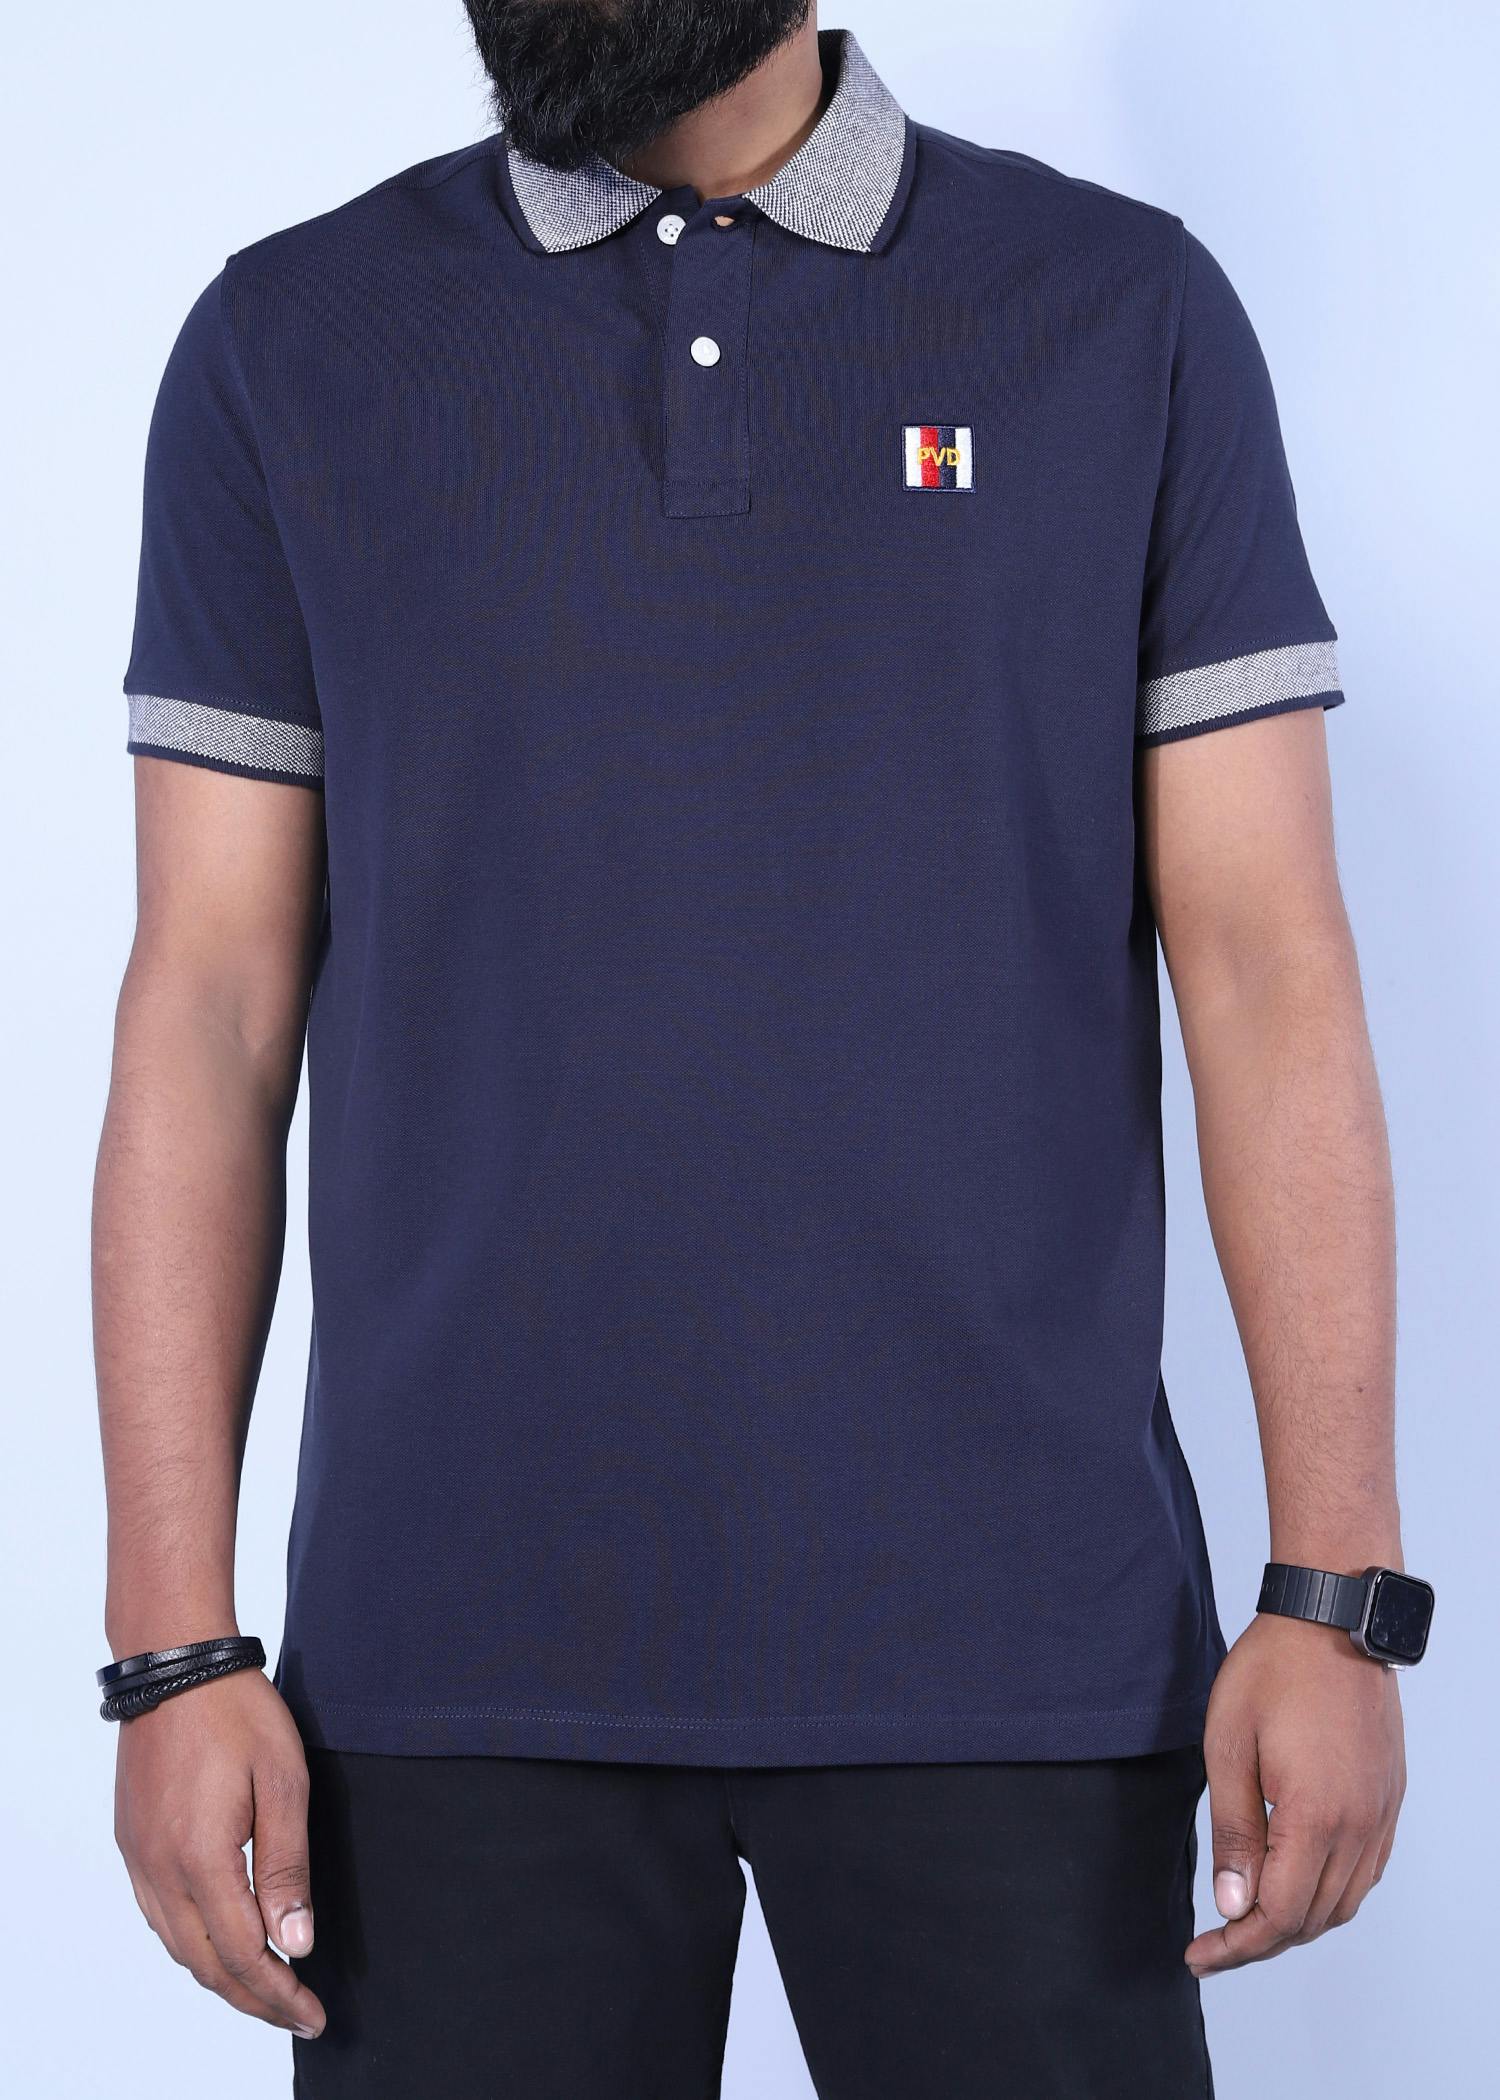 nightingale iii polo navy color half front view